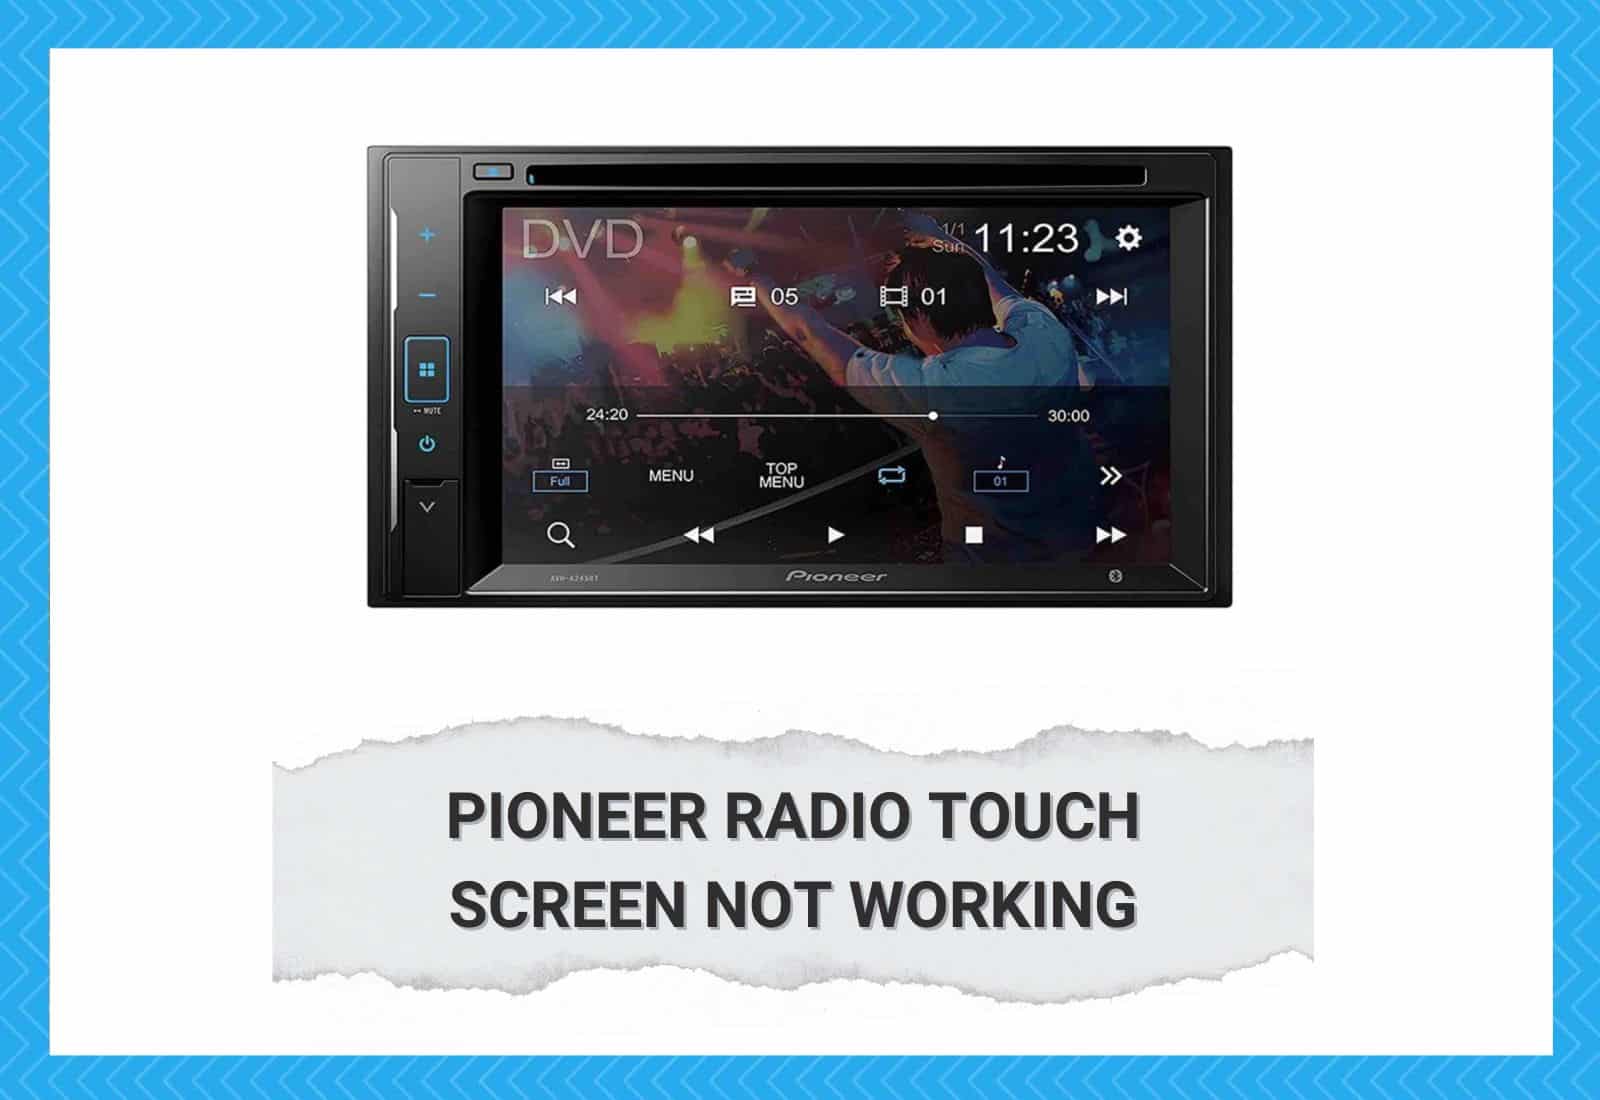 Pioneer Radio Touch Screen Not Working